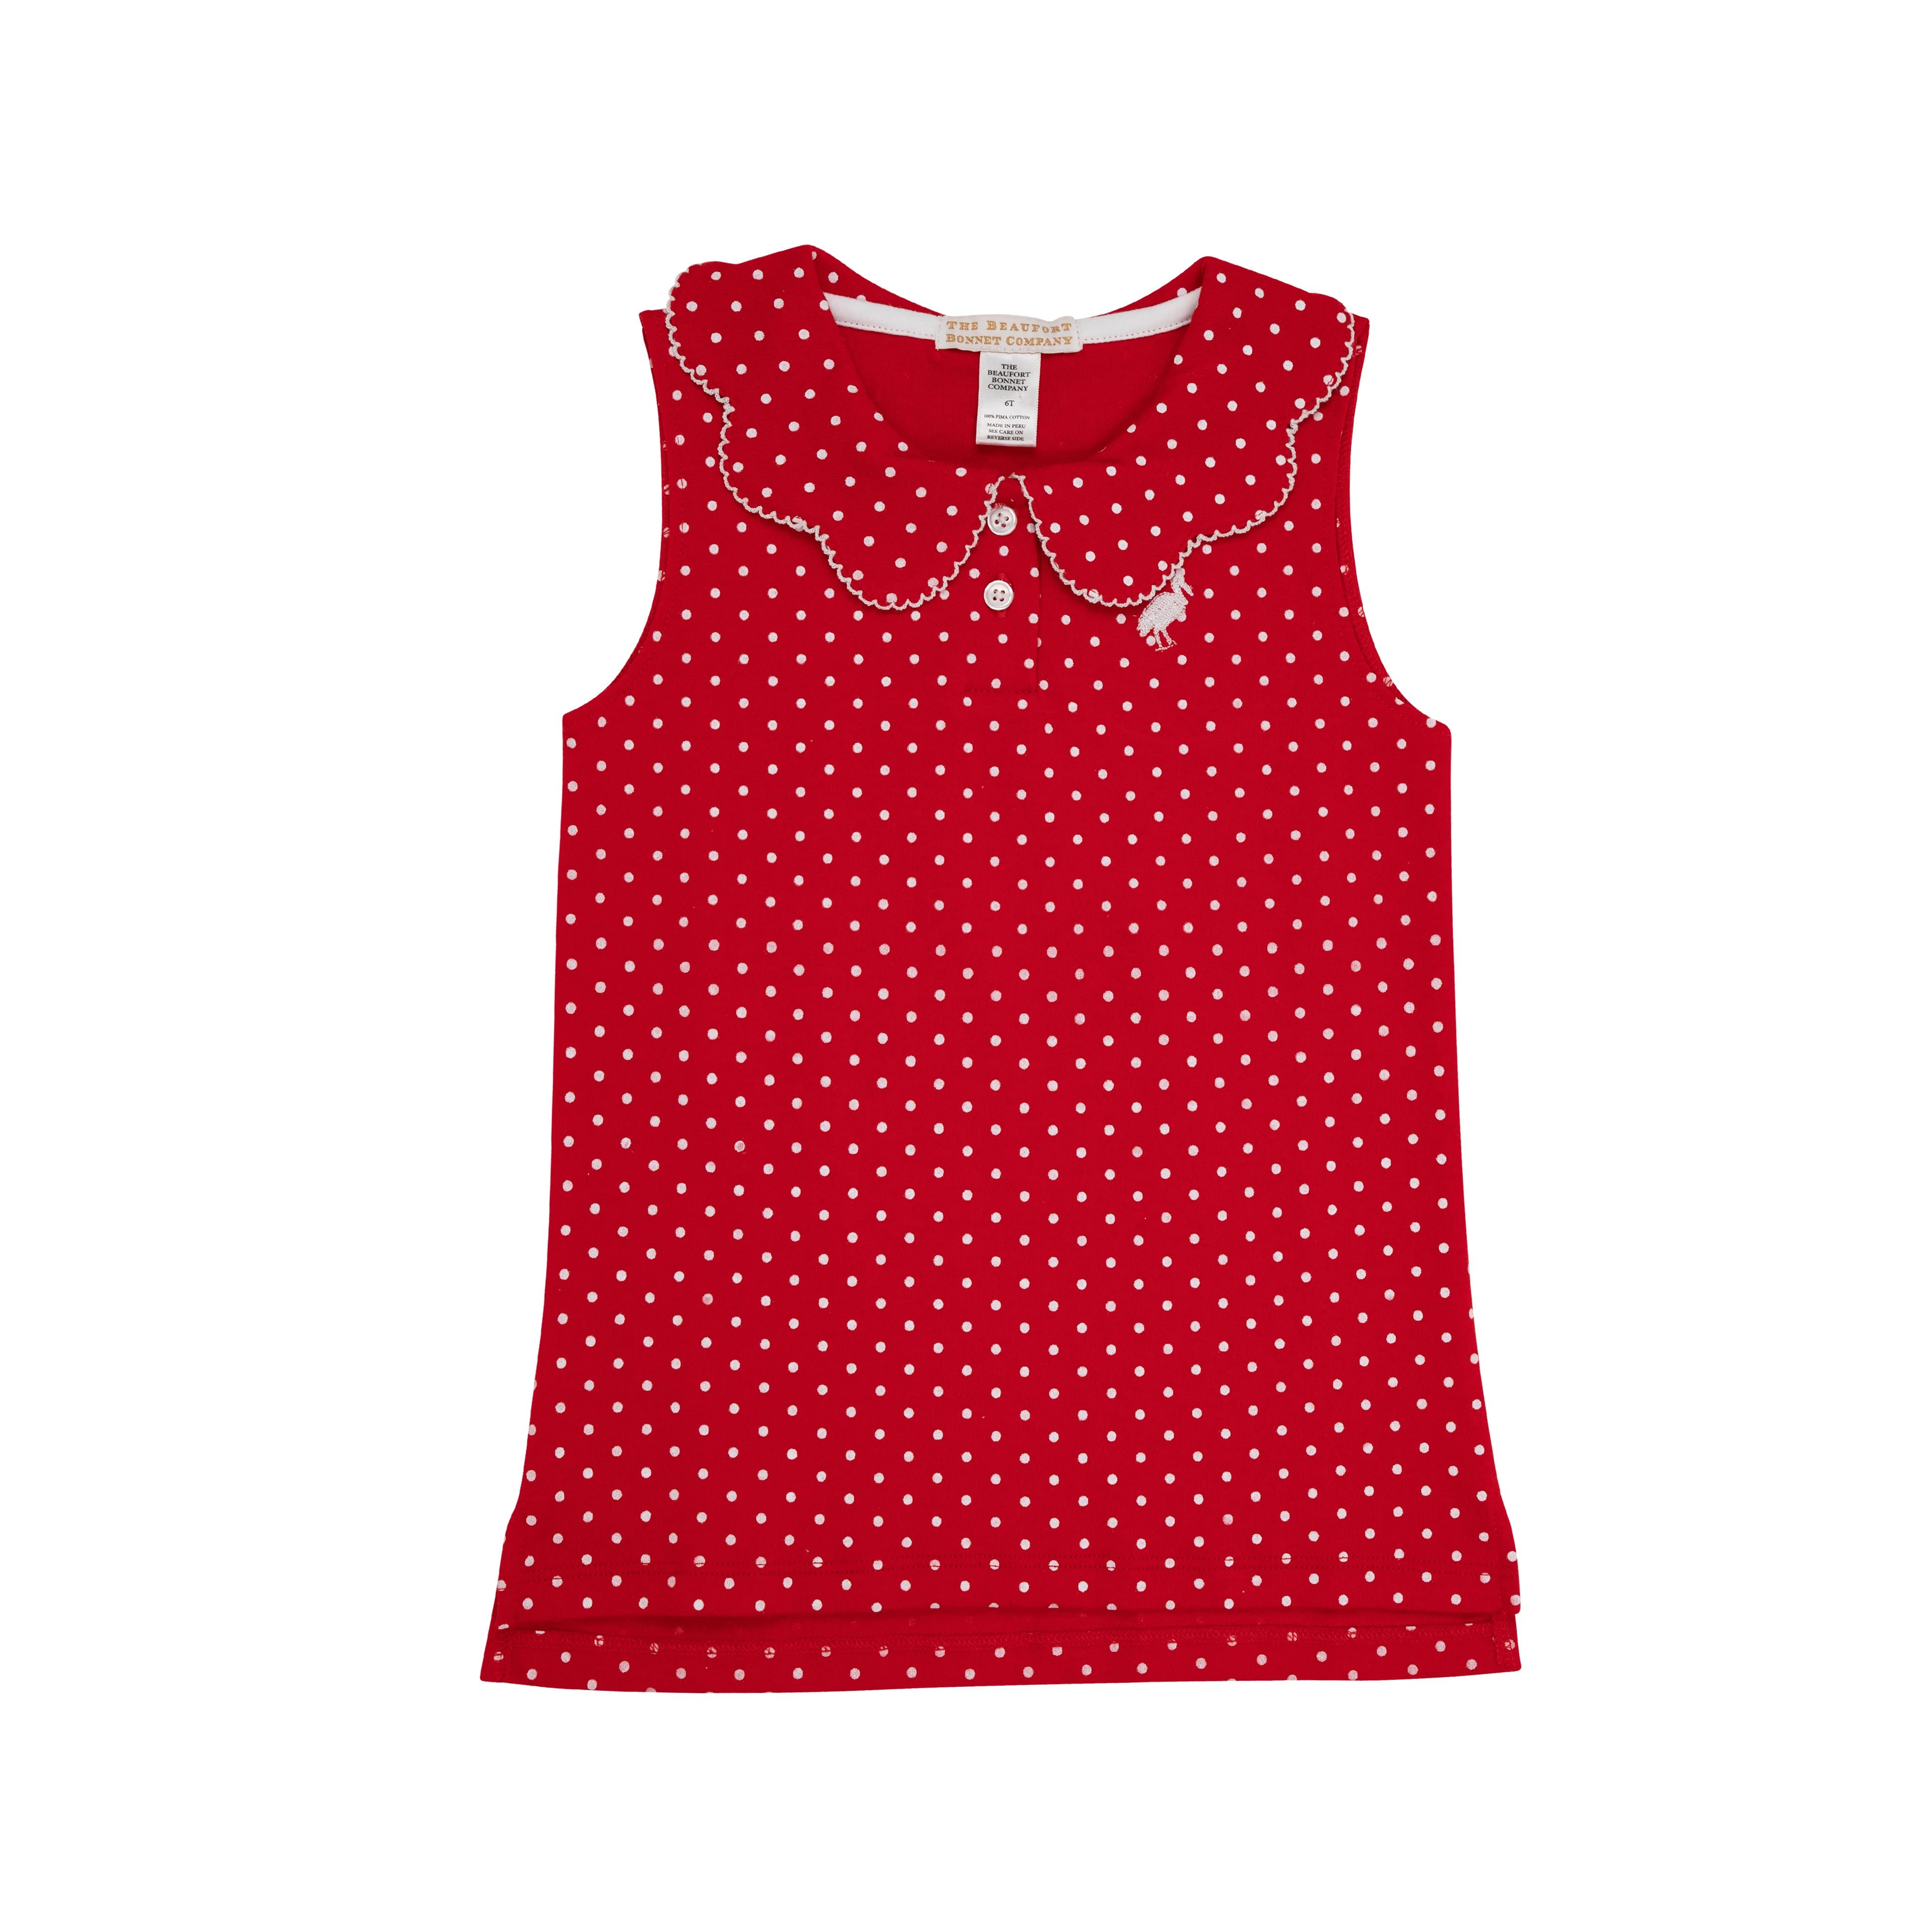 Paige's Playful Polo - Richmond Red & Worth Avenue White Micro Dot | The Beaufort Bonnet Company